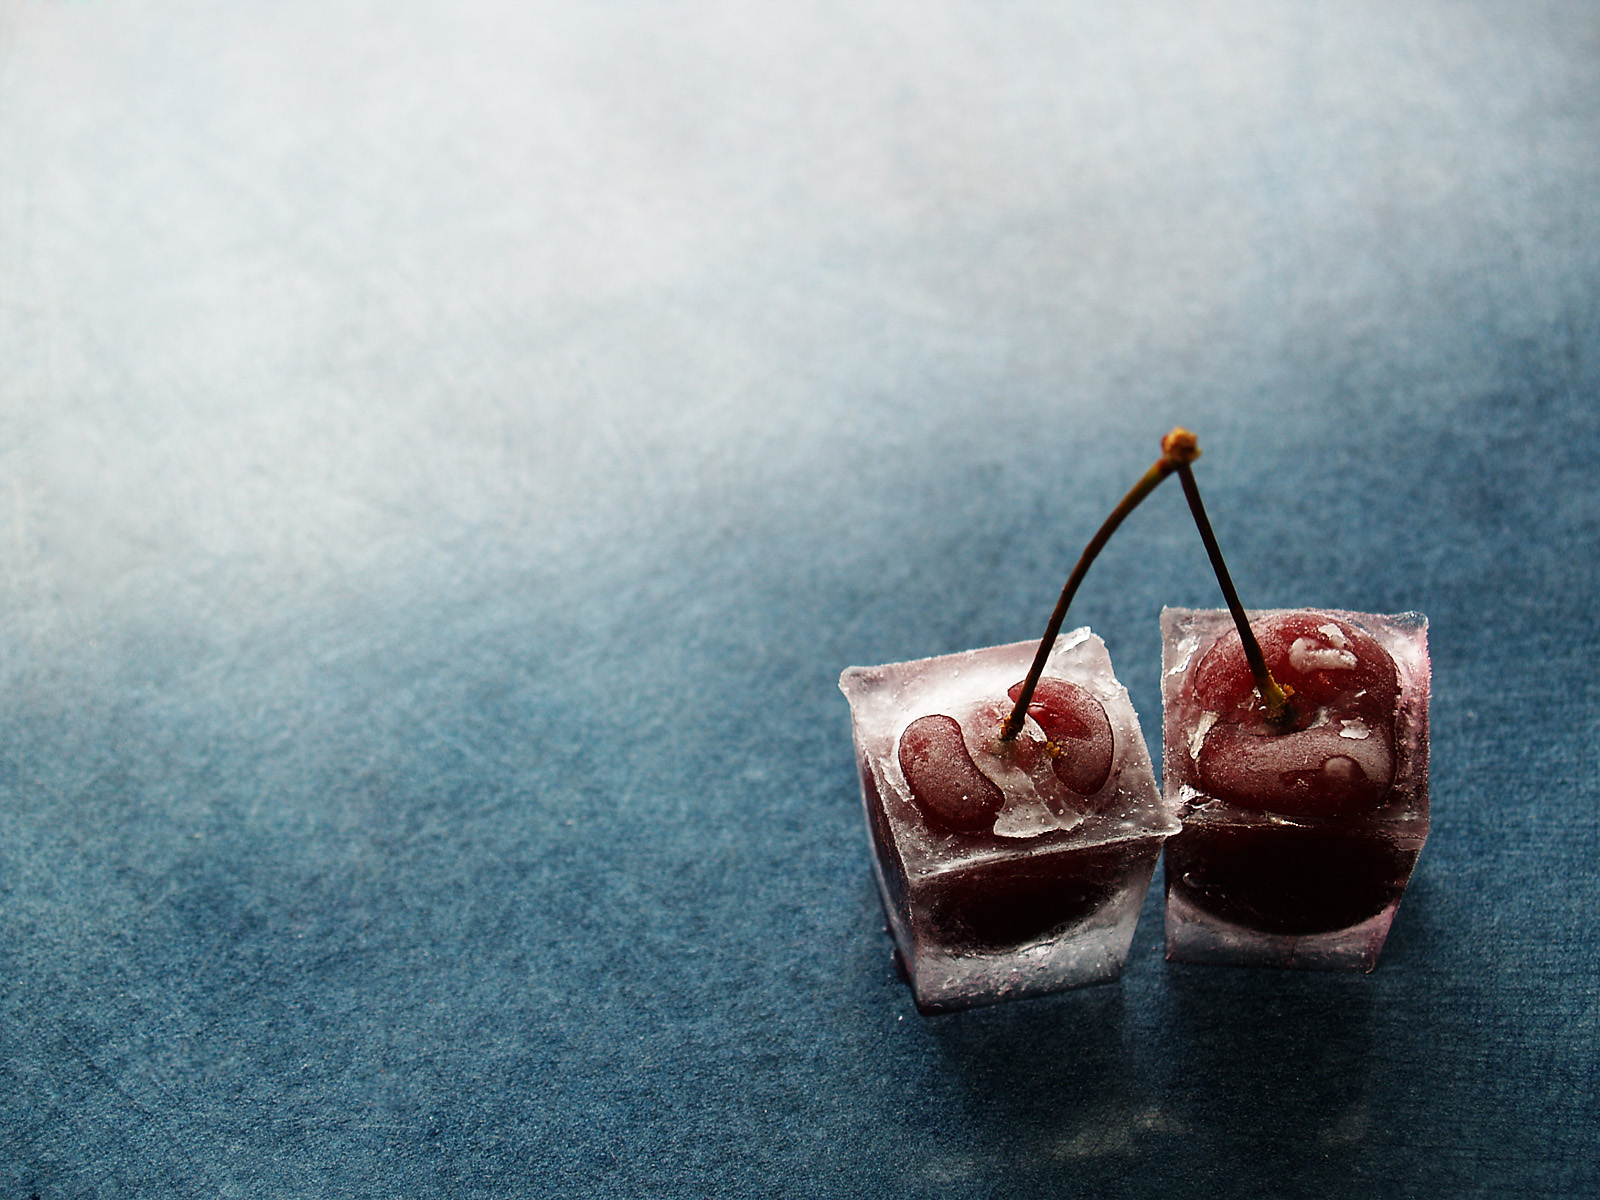 Previous, Photoshop - Cherries in ice wallpaper